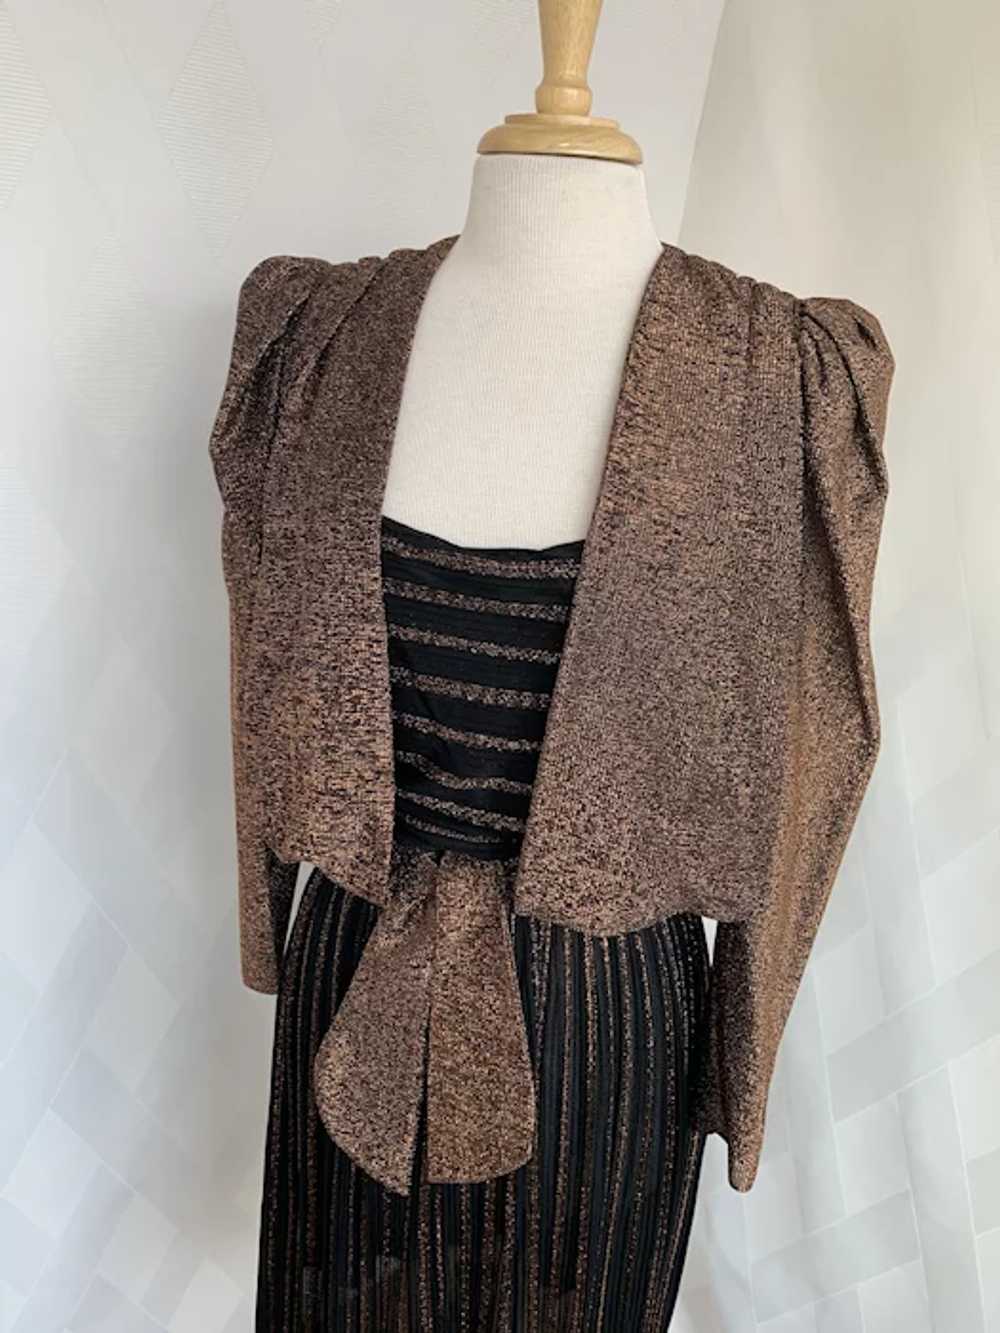 1980s Strappy, Copper Metallic Dress with Jacket - image 3